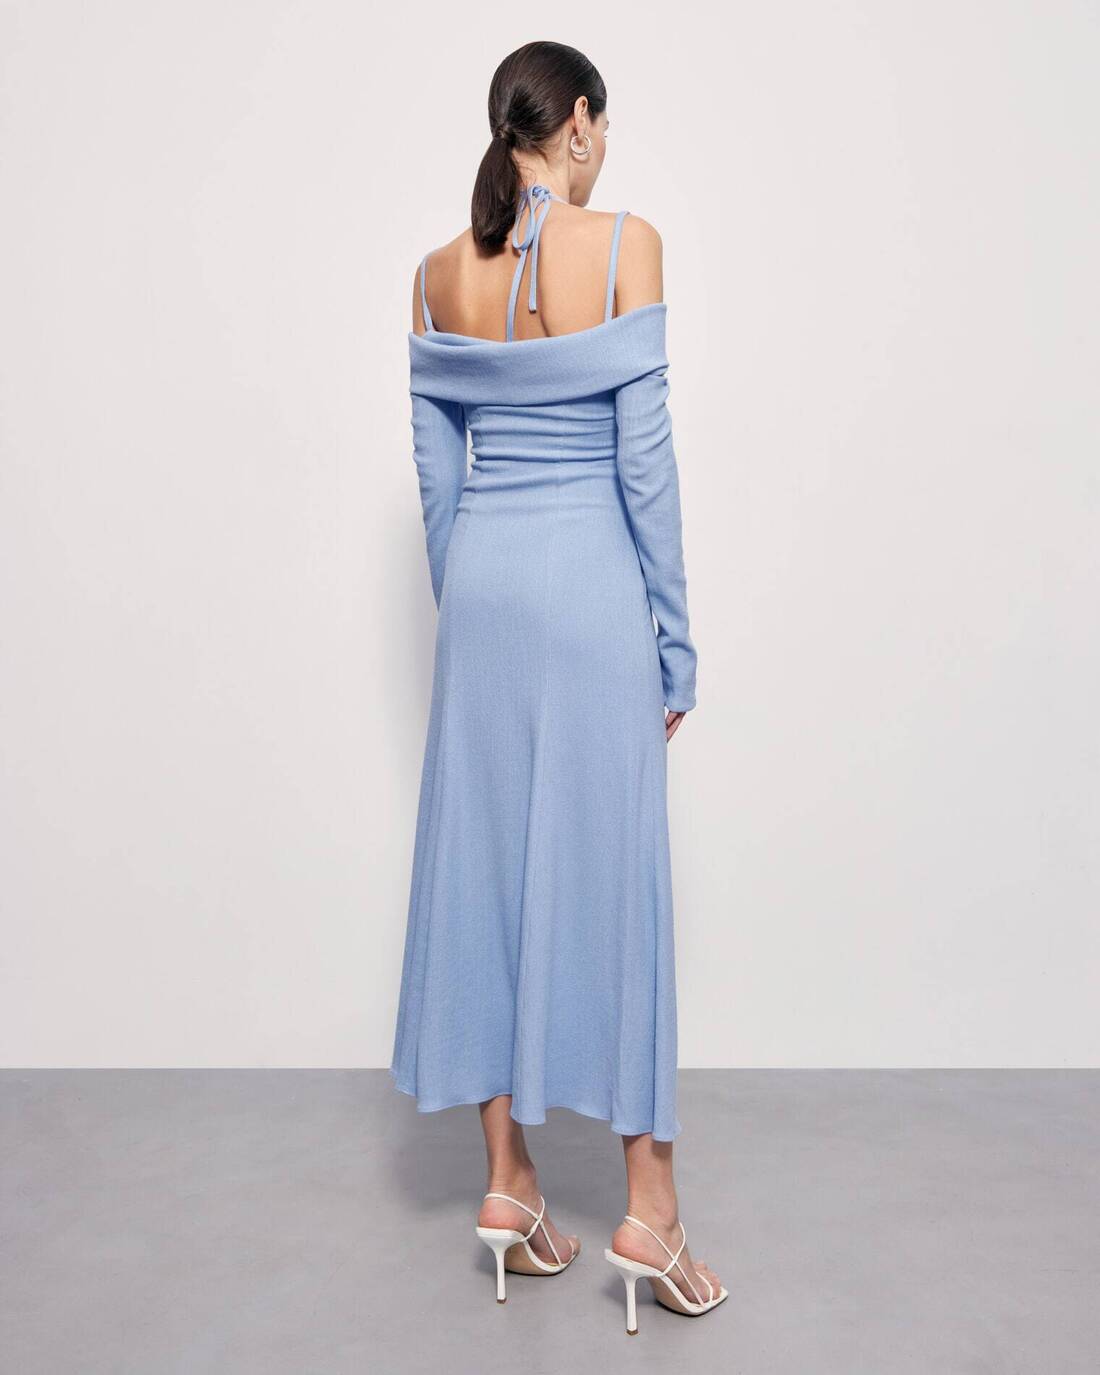 Midi dress with a decorative knot on the chest